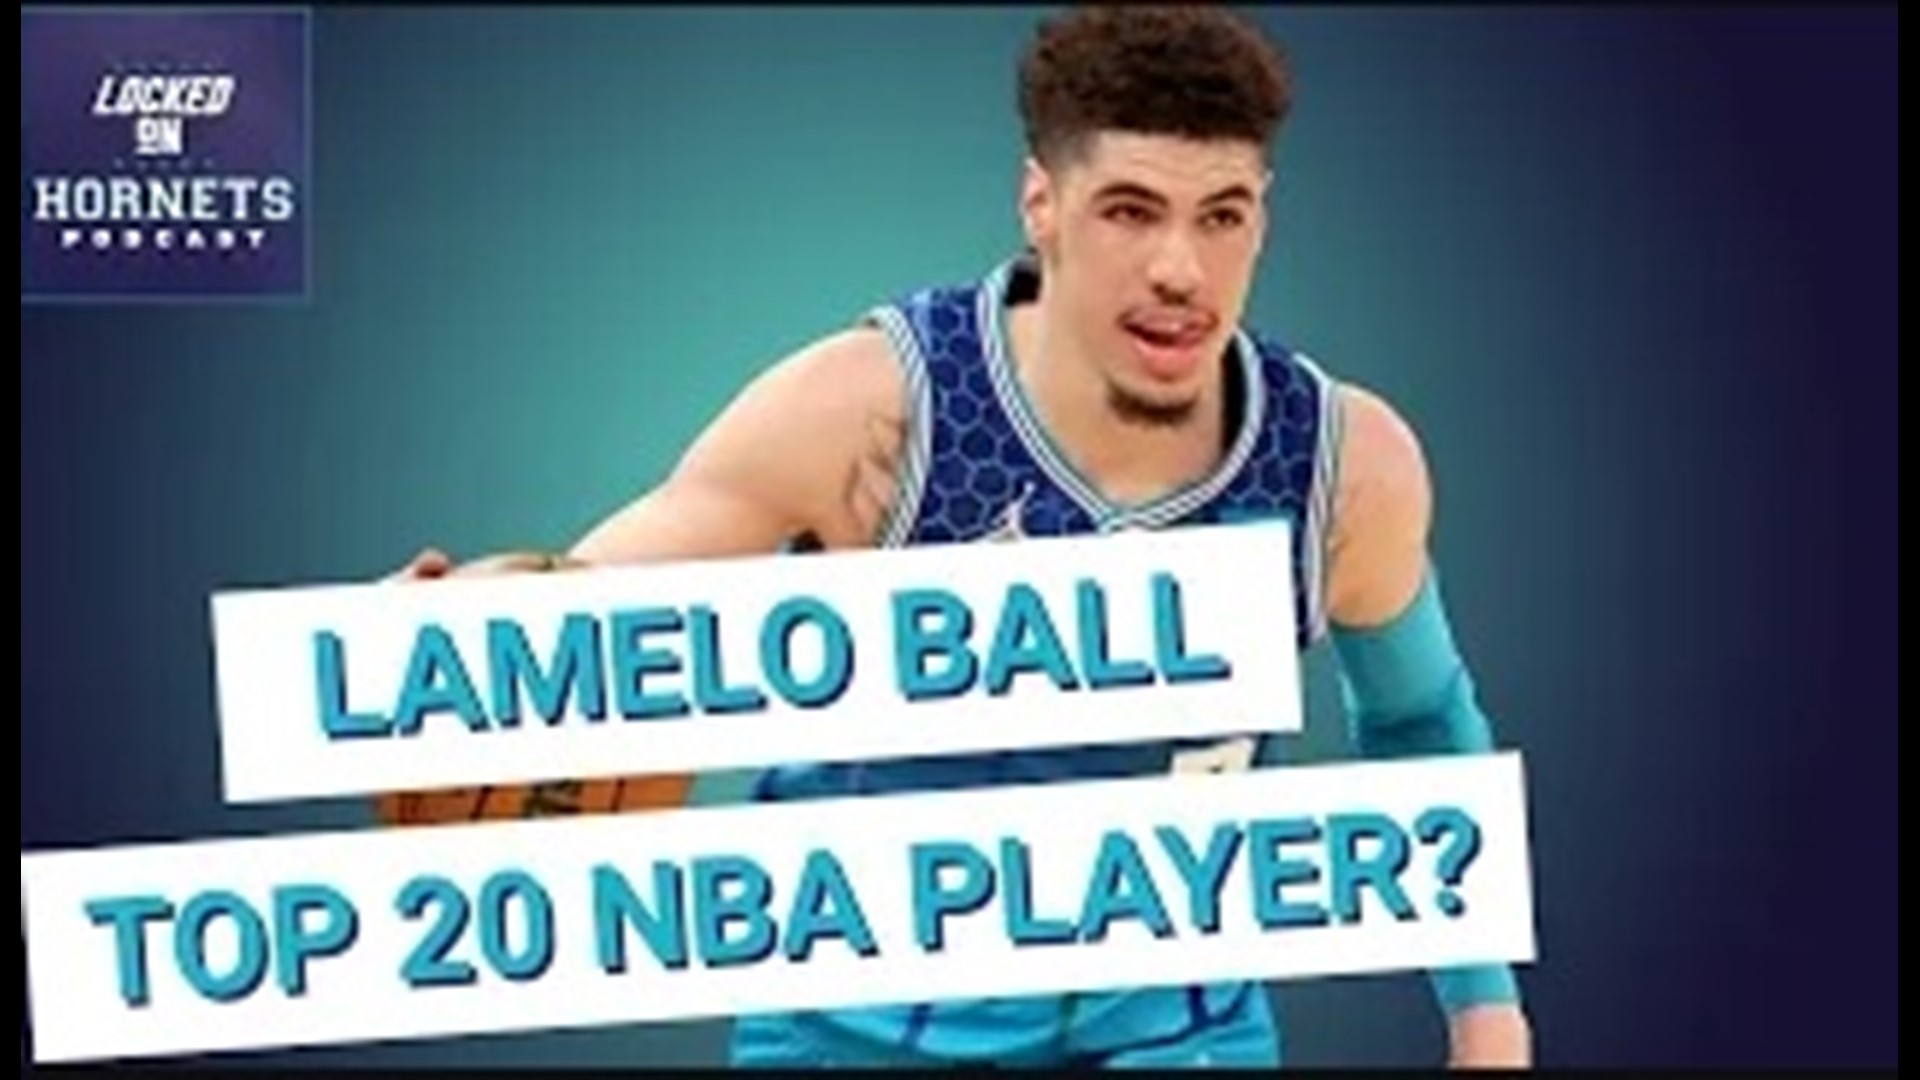 Where does LaMelo Ball rank in terms of top 50 players in the NBA? Plus, what would a PJ Washington extension look like? That and more on Locked on Hornets!